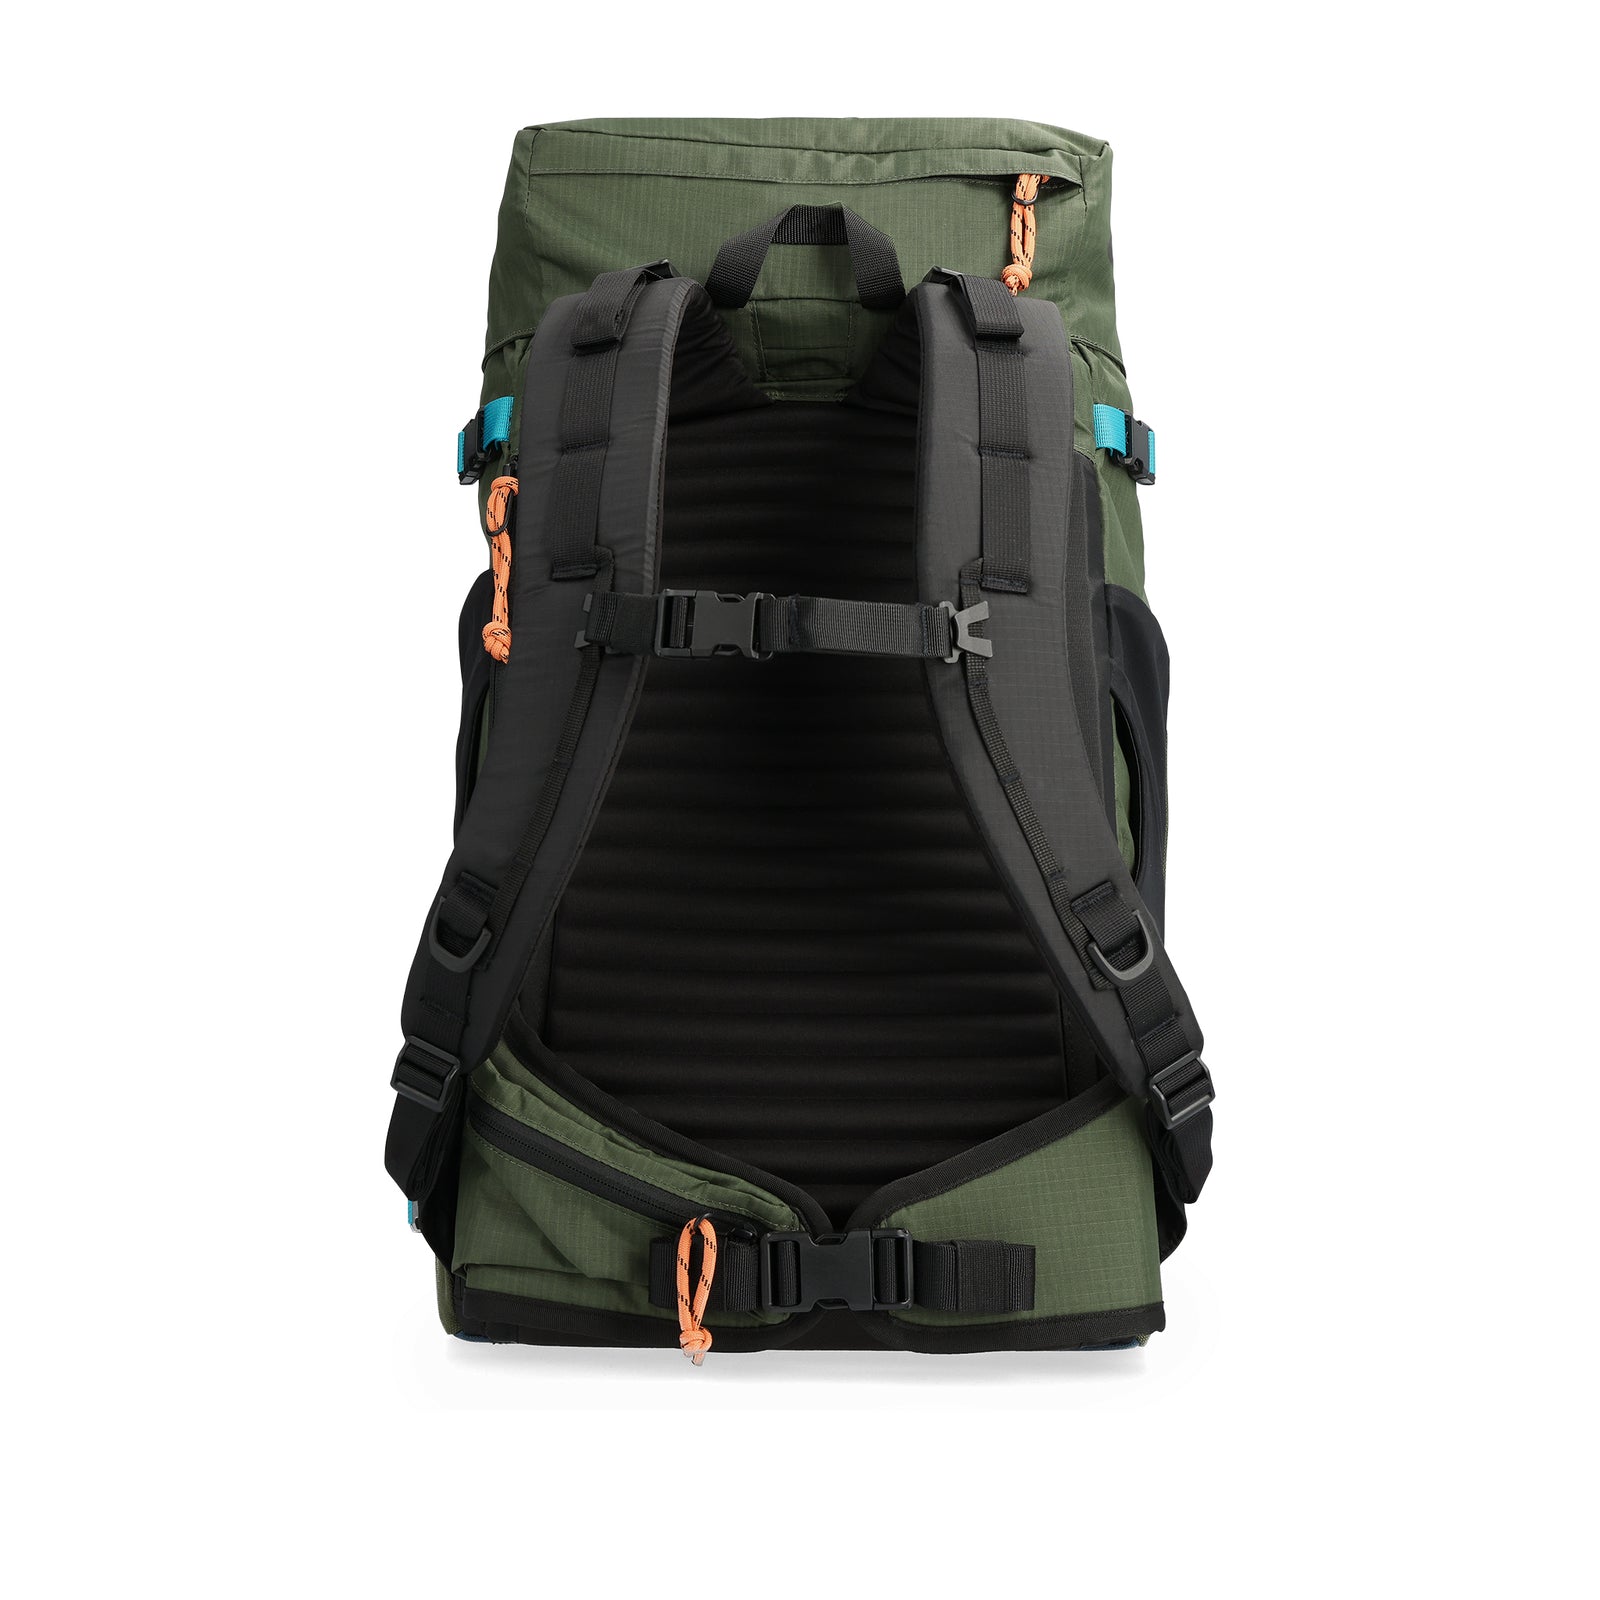 Back View of Topo Designs Mountain Pack 28L in "Olive / Hemp"